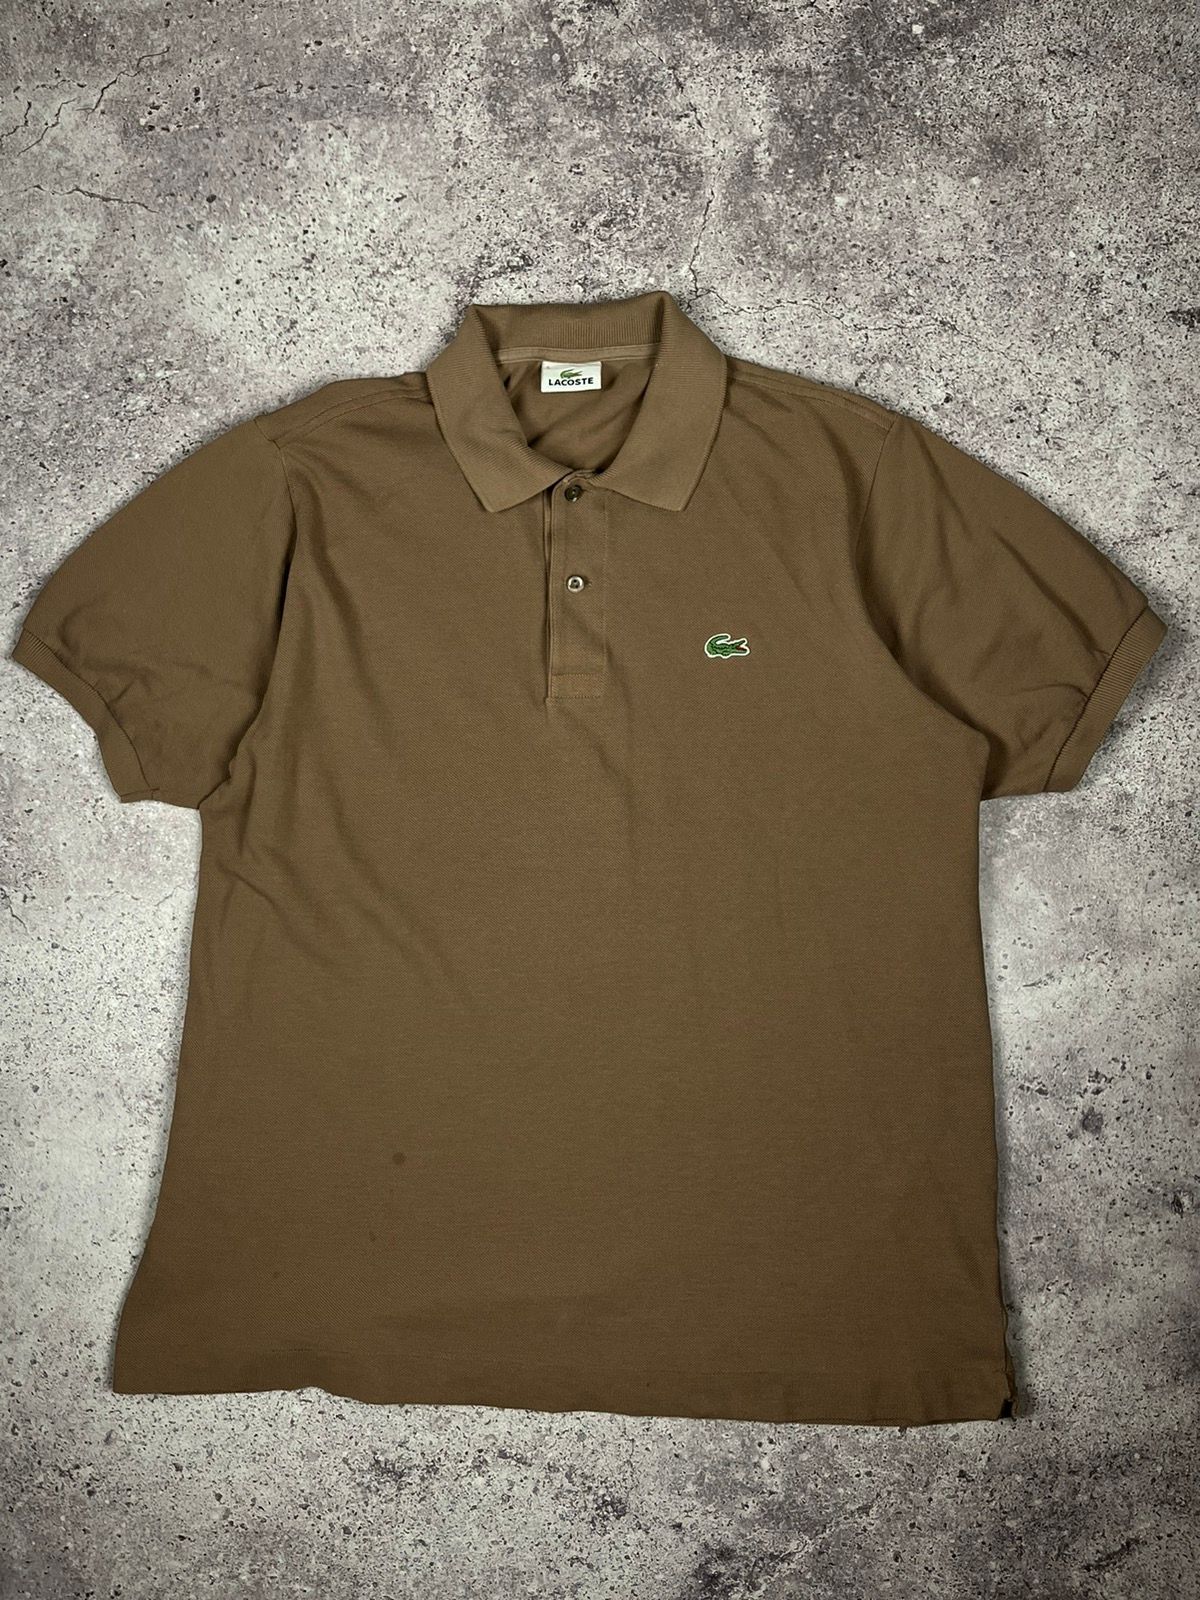 Pre-owned Lacoste X Vintage Brown Lacoste Polos Vintage